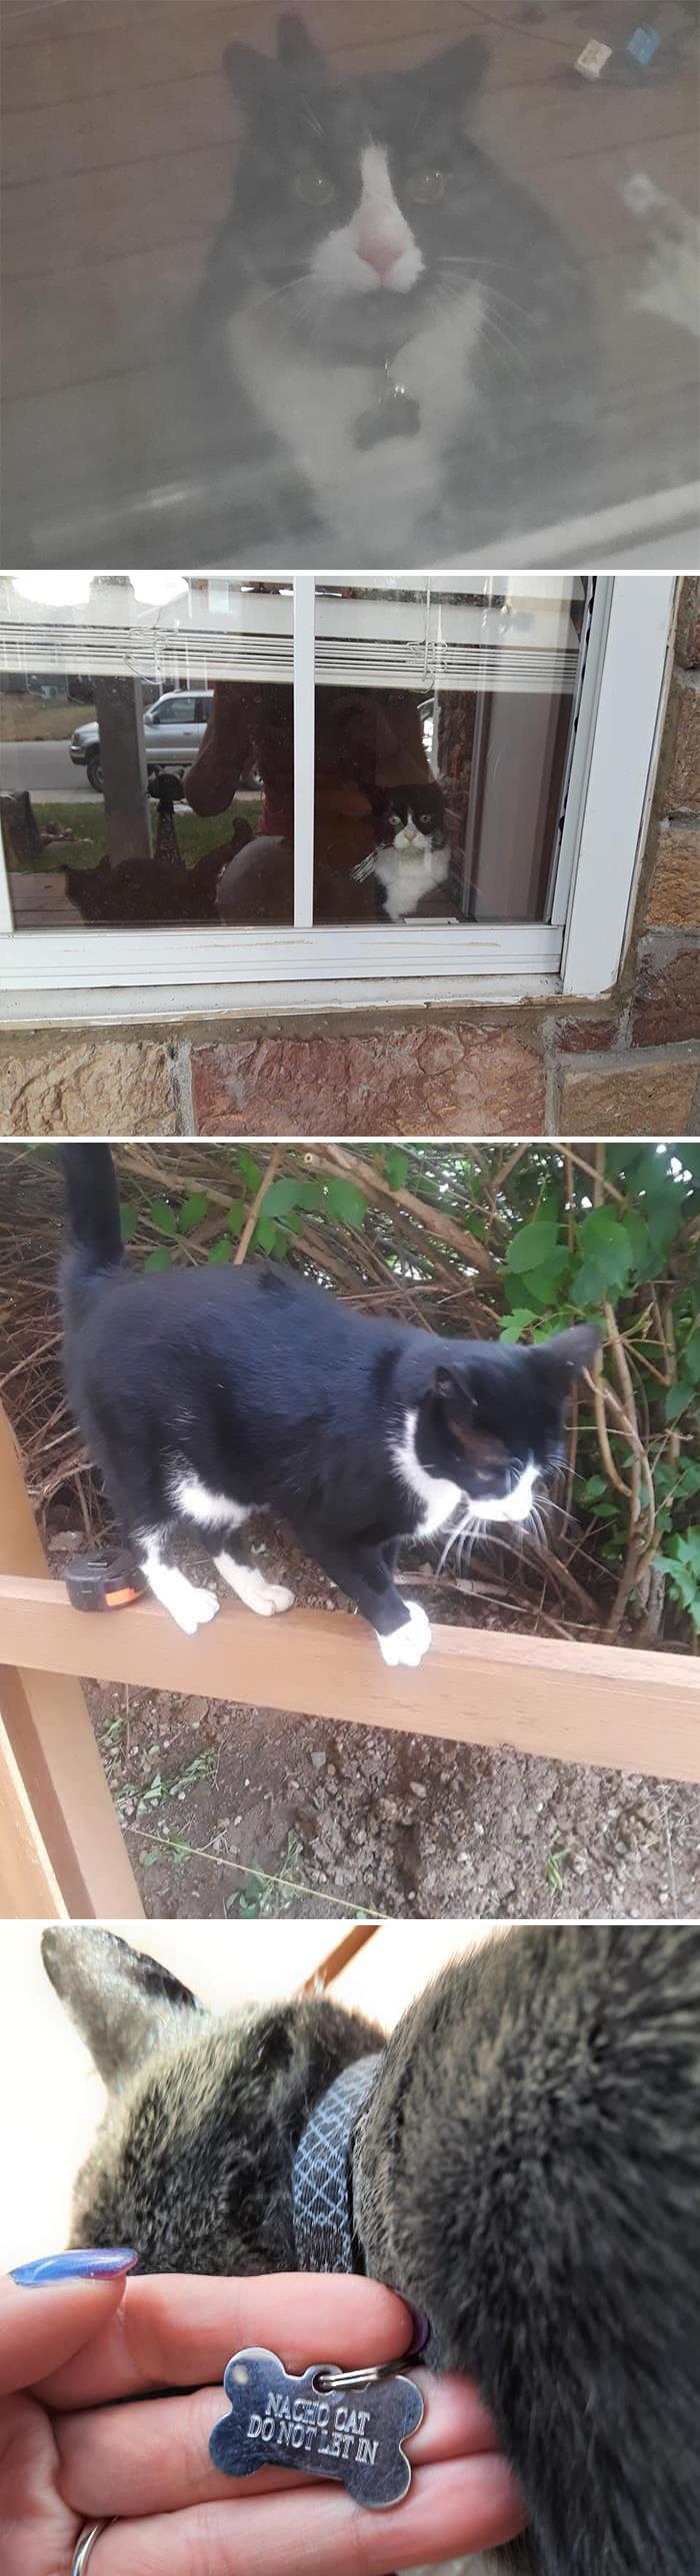 This Is My Neighbor's Cat Mr Sparkle Whiskers. He Goes Around The Neighborhood Acting Like A Starving Stray And Gets Fed By Multiple Households